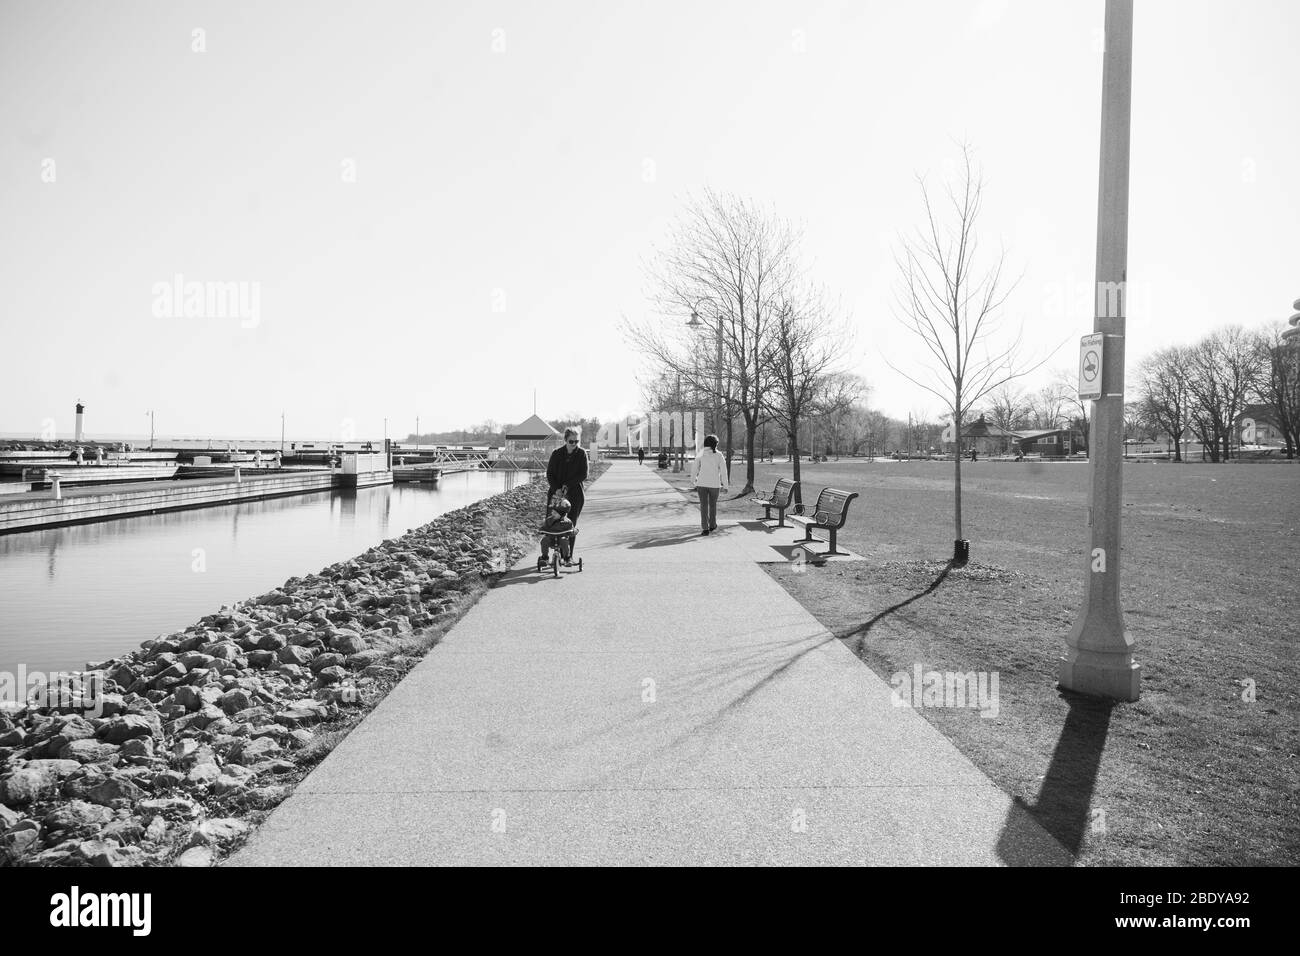 OAKVILLE, ONTARIO, CANADA - APRIL 28, 2020: PEOPLE GO FOR A WALK ALOING THE WATERFRONT DURING COVID-19 PANDEMIC. Stock Photo